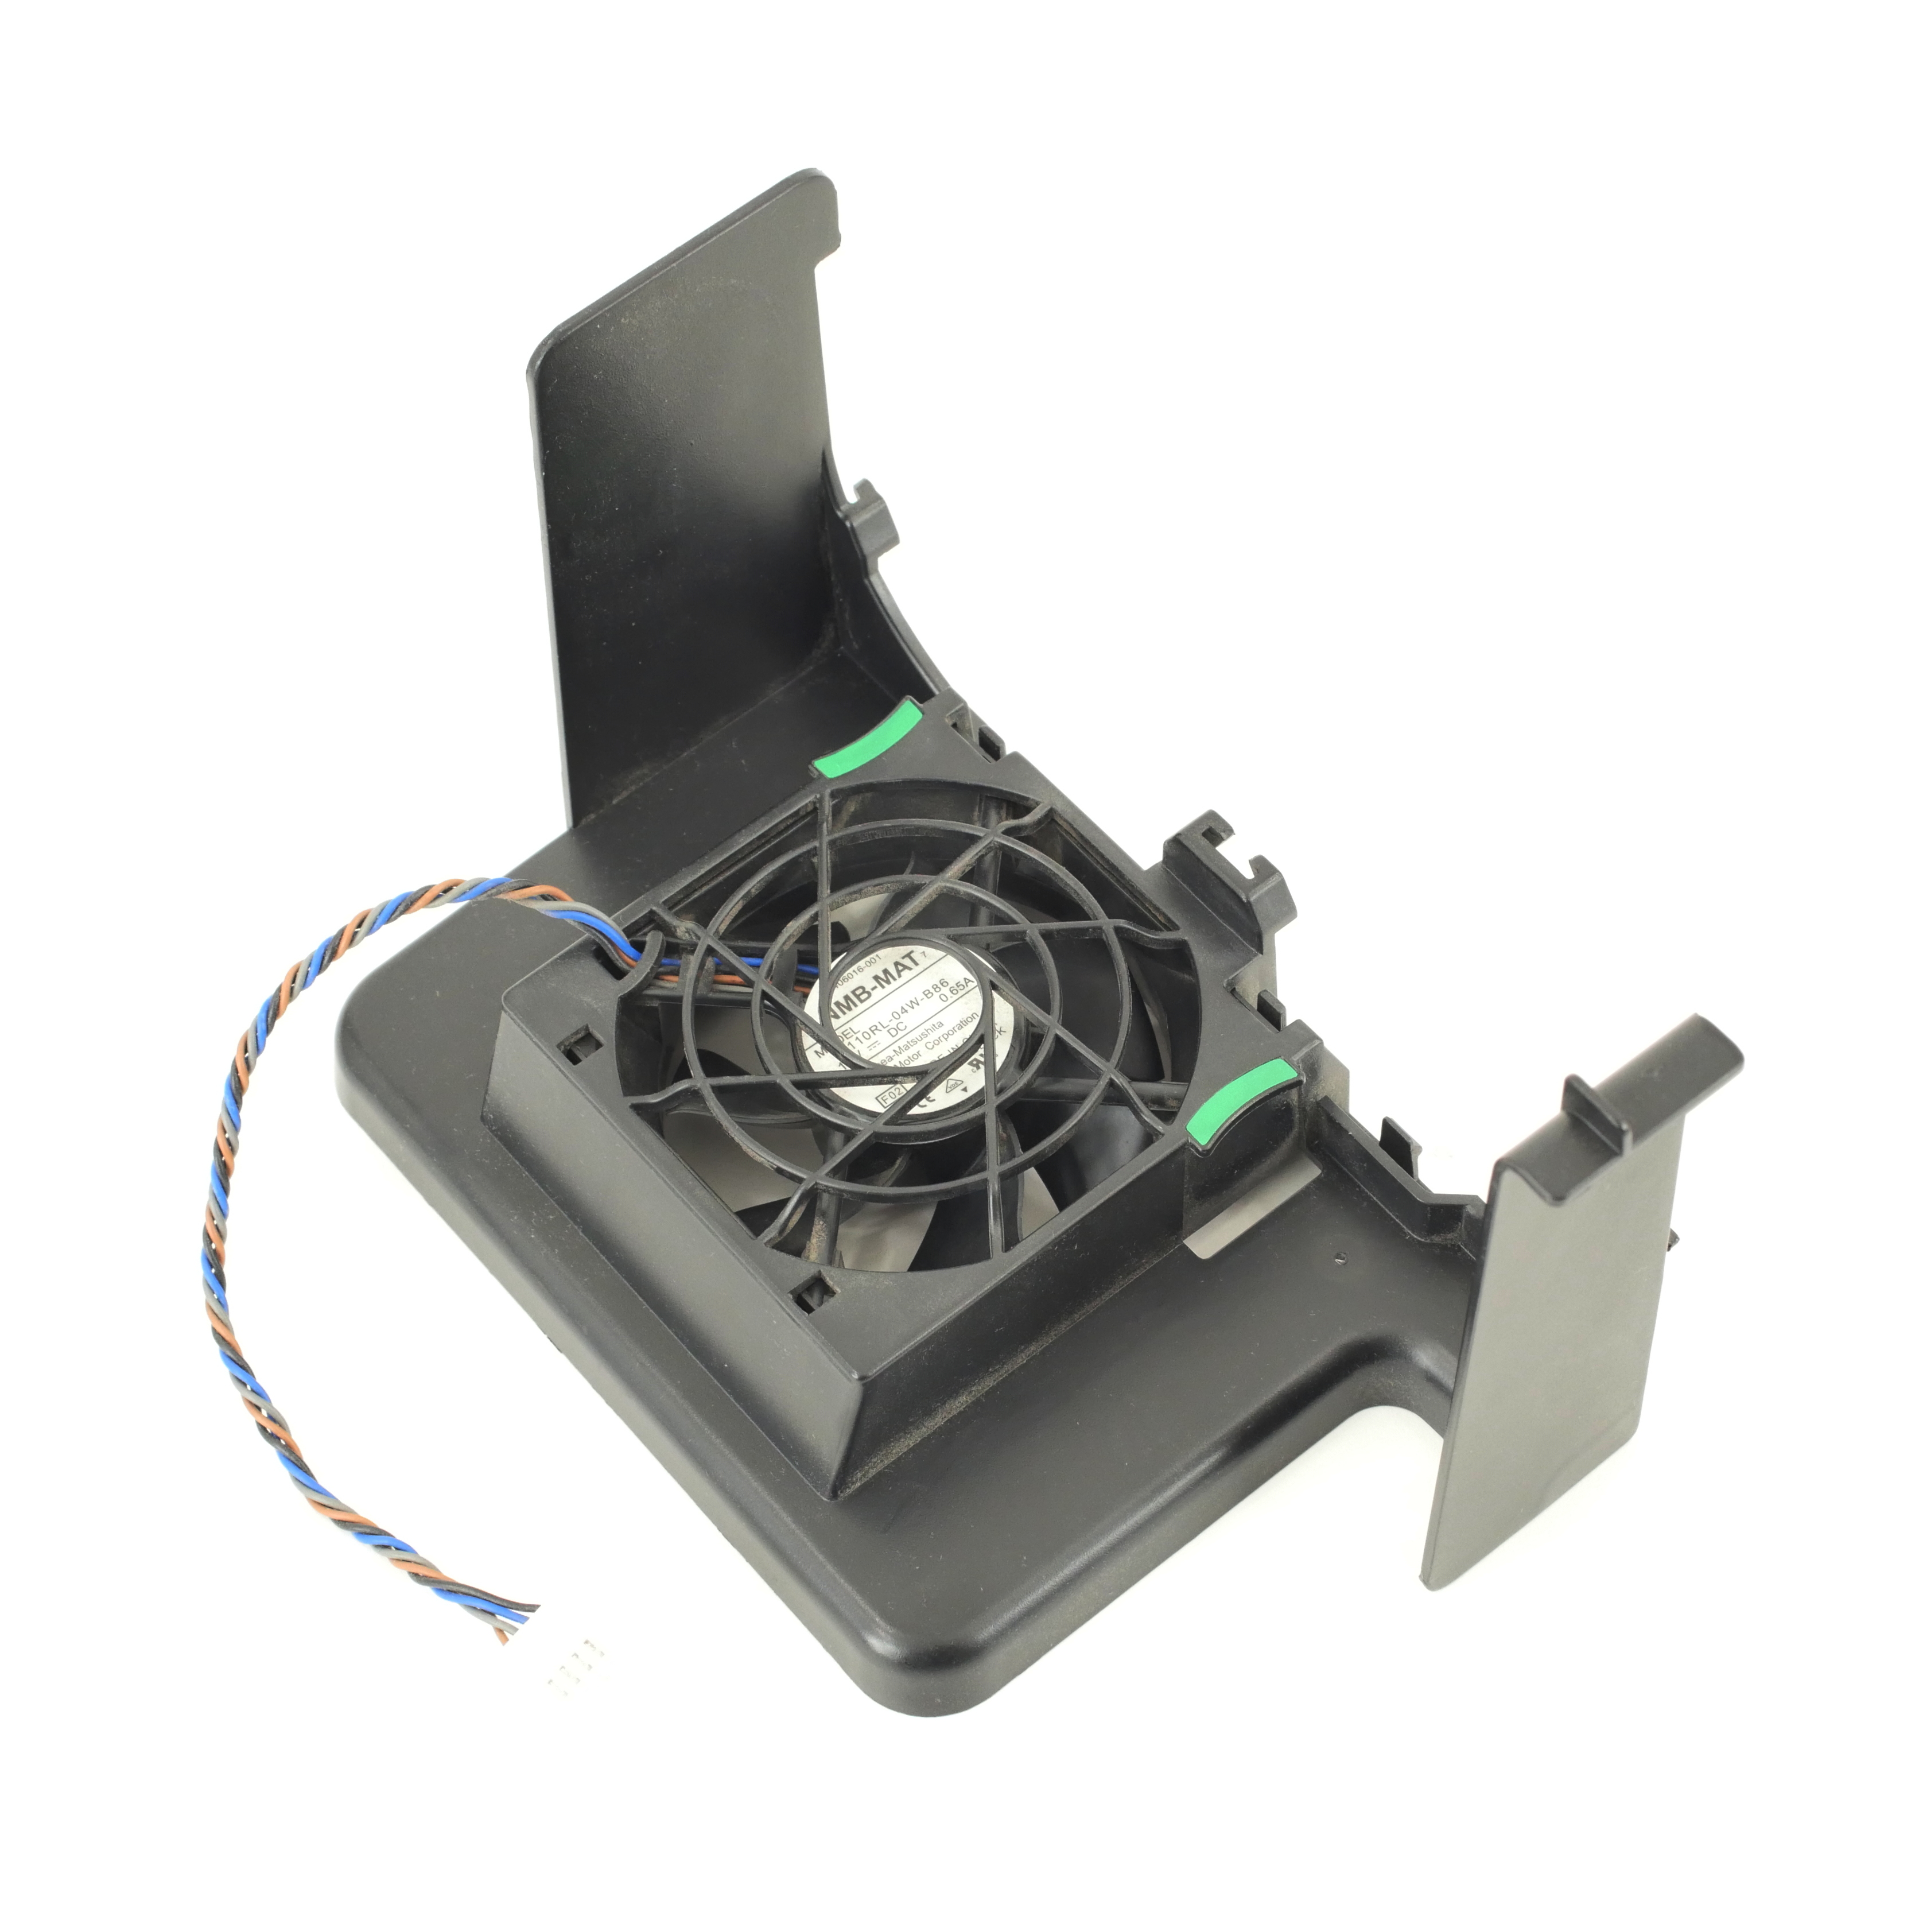 HP XW6400 Workstation 120mm Memory System Fan 406016-001 with Case 432907-001 - Click Image to Close